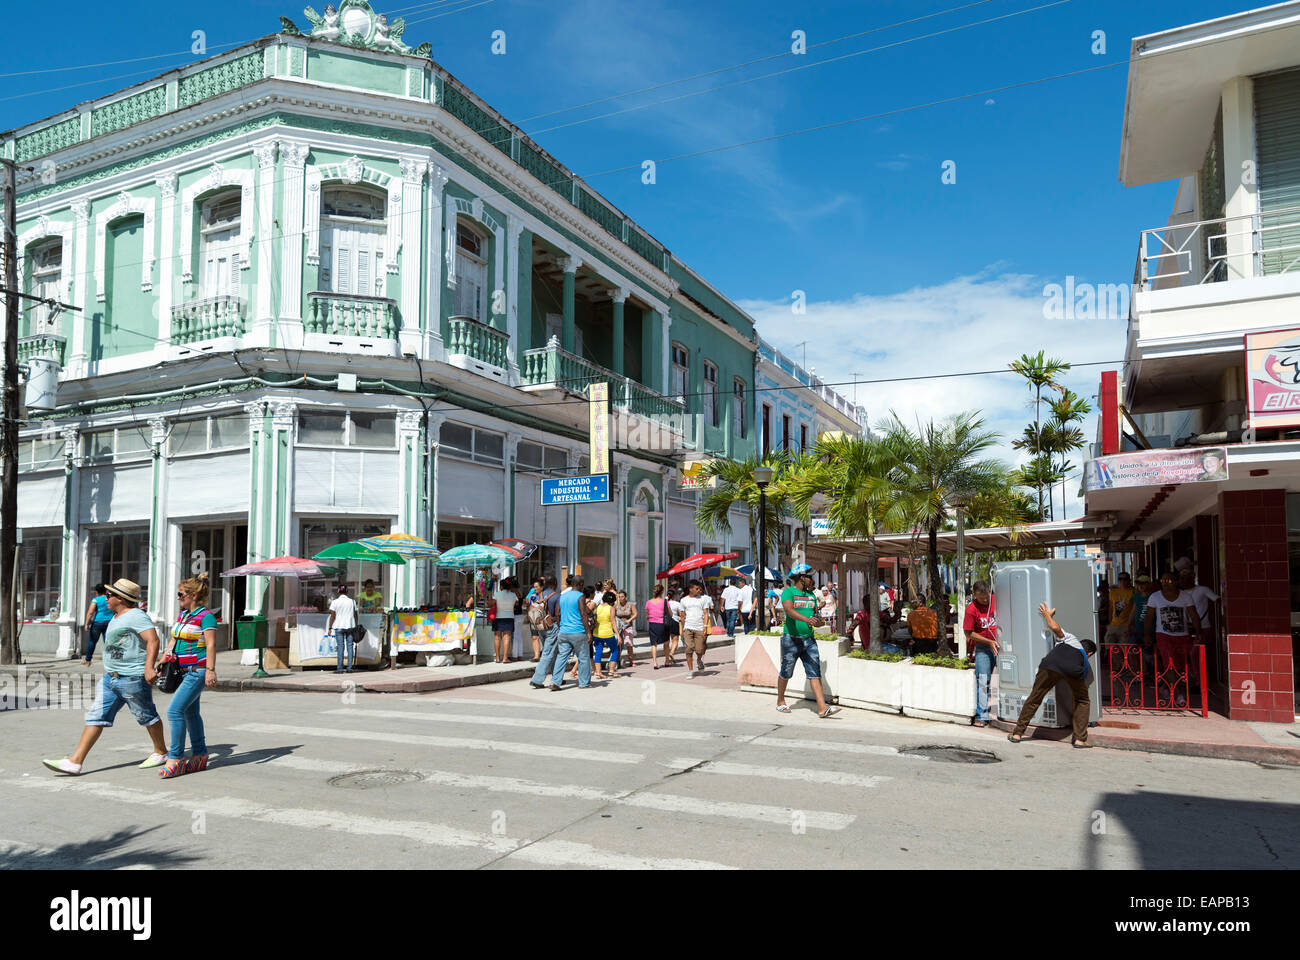 CIENFUEGOS, CUBA - MAY 7, 2014: A lively downtown street in the city of Cienfuegos, Cuba Stock Photo